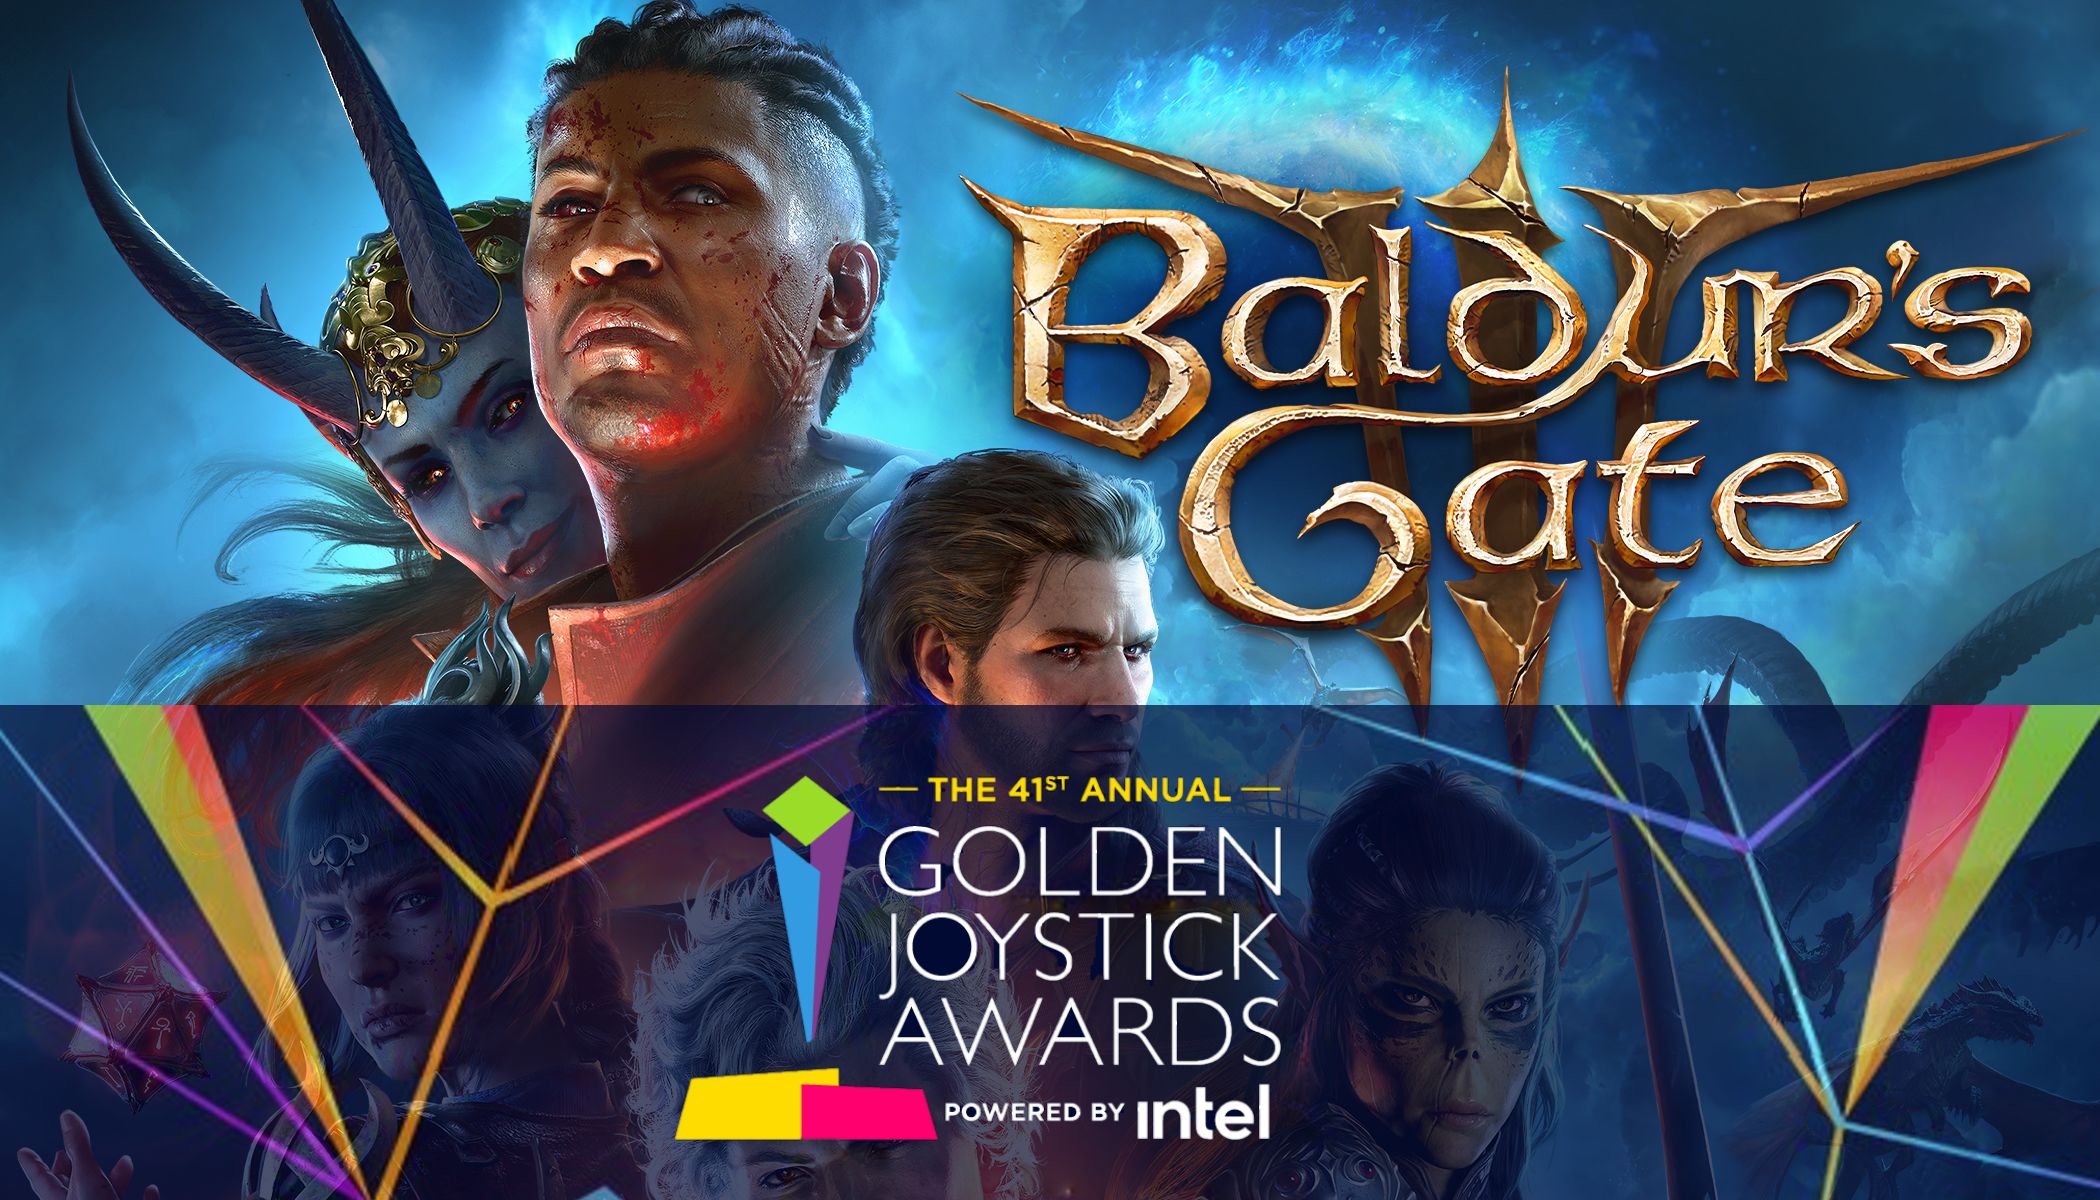 Baldur's Gate 3 is your Ultimate Game of the Year at the Golden Joystick  Awards